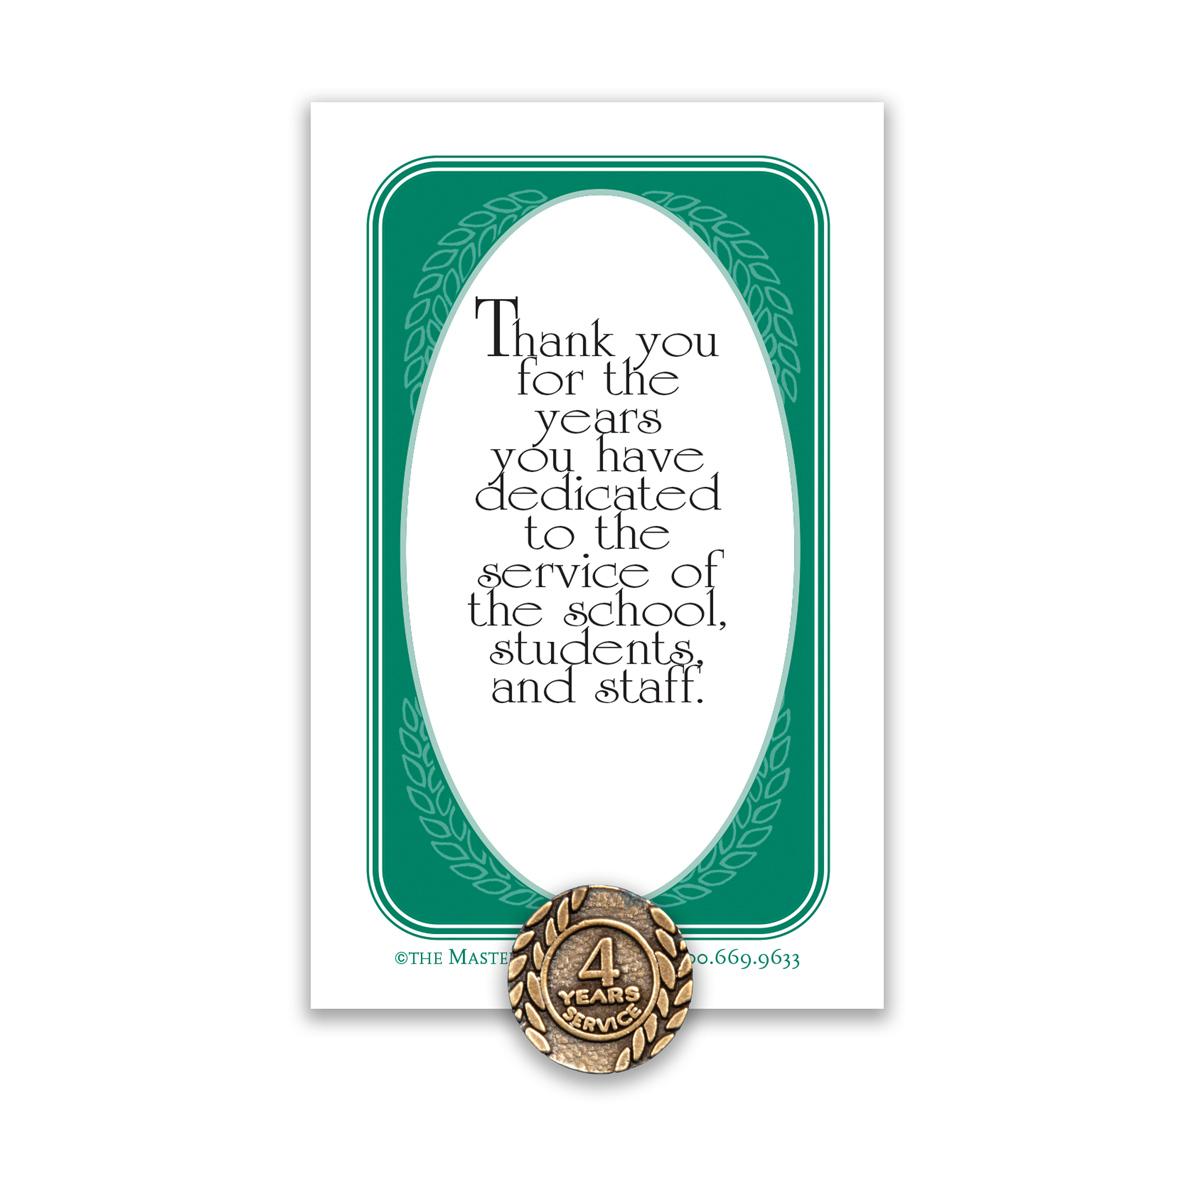 4 Years of Service Antique Gold Tone Lapel Pin with Thank You Message